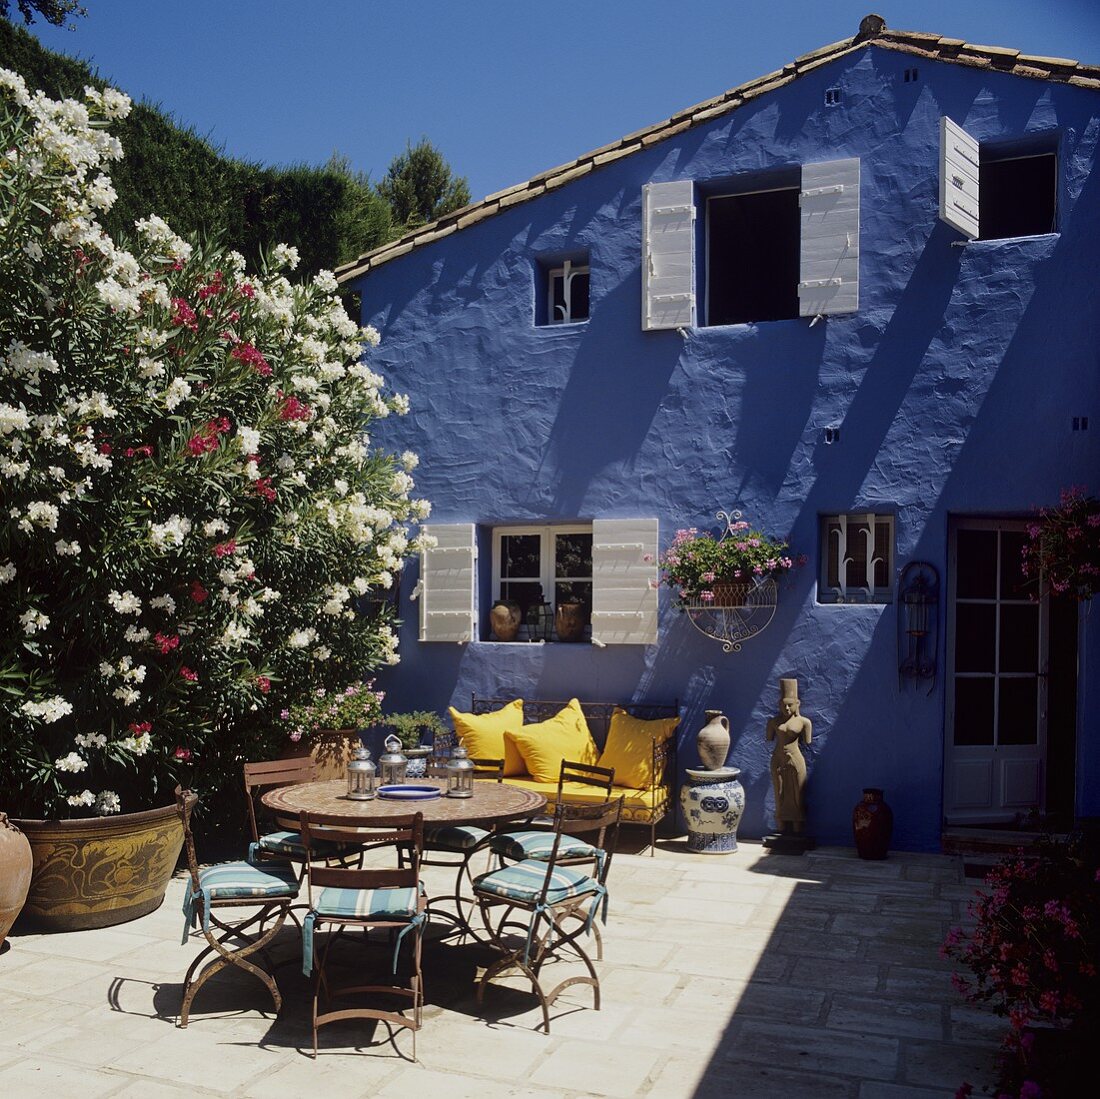 Holiday in a blue house - terrace tables and chairs in the sun next to scented oleanders